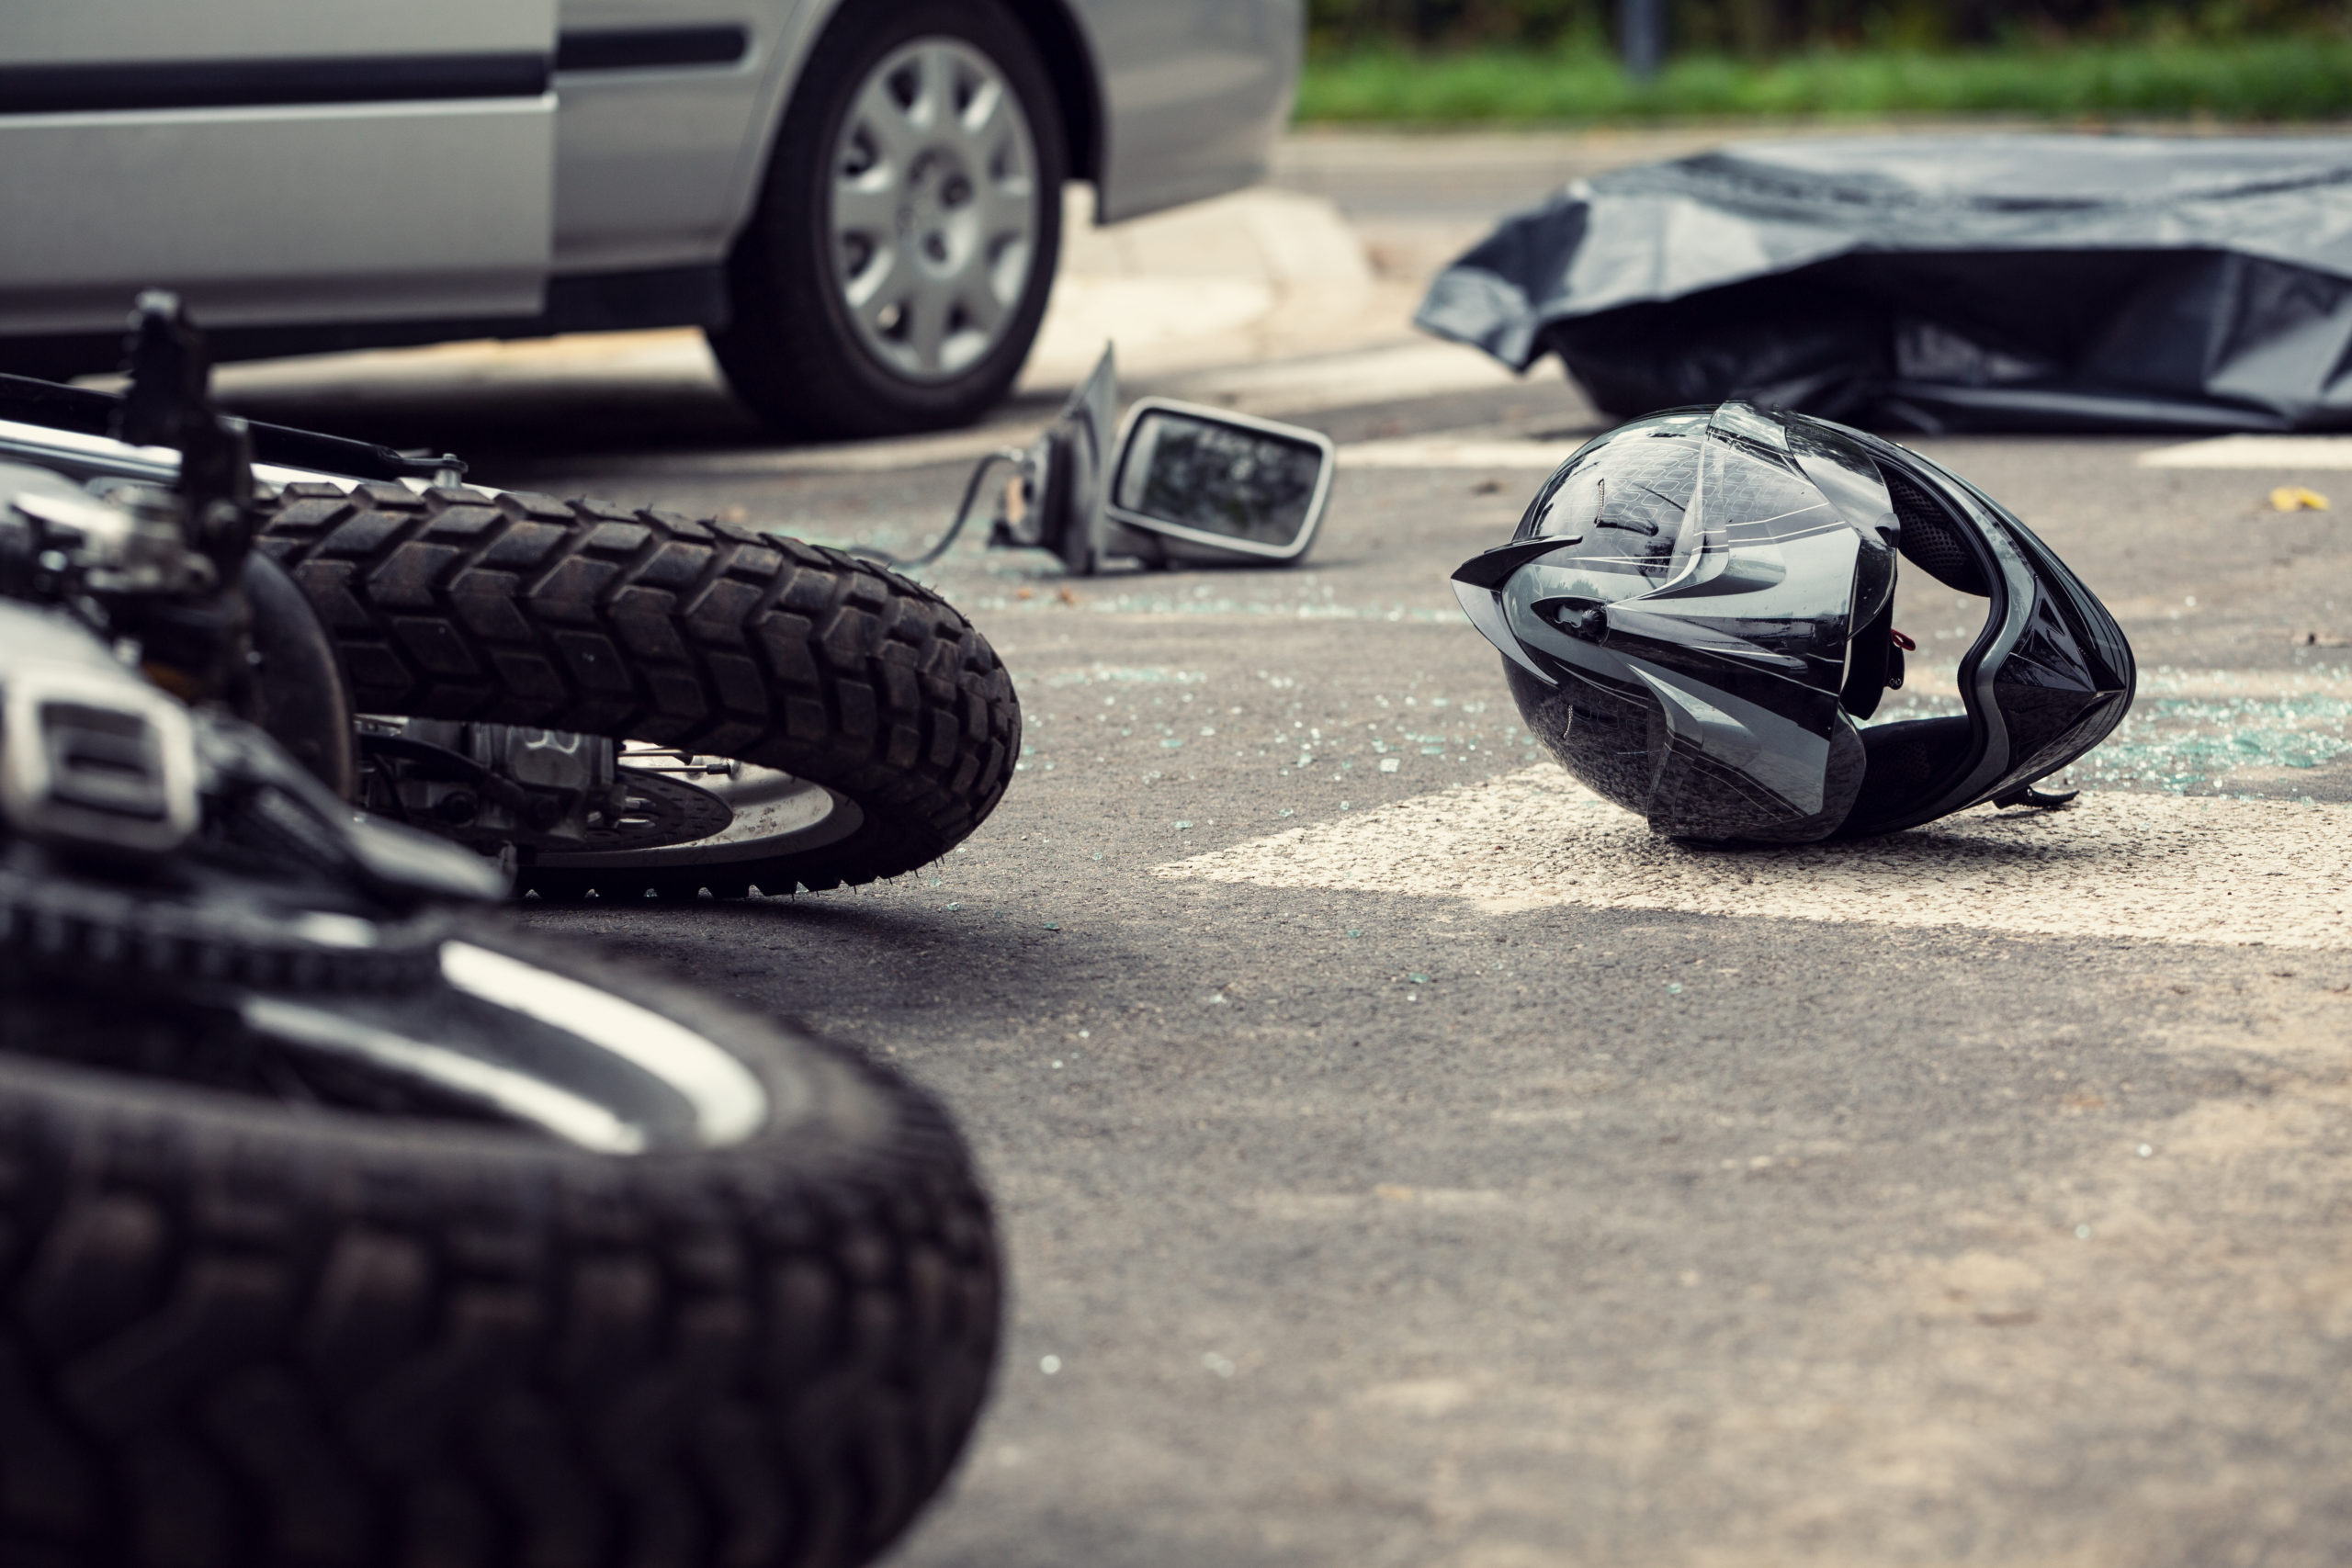 Motorcycle accident attorneys in Daytona Beach answer common questions